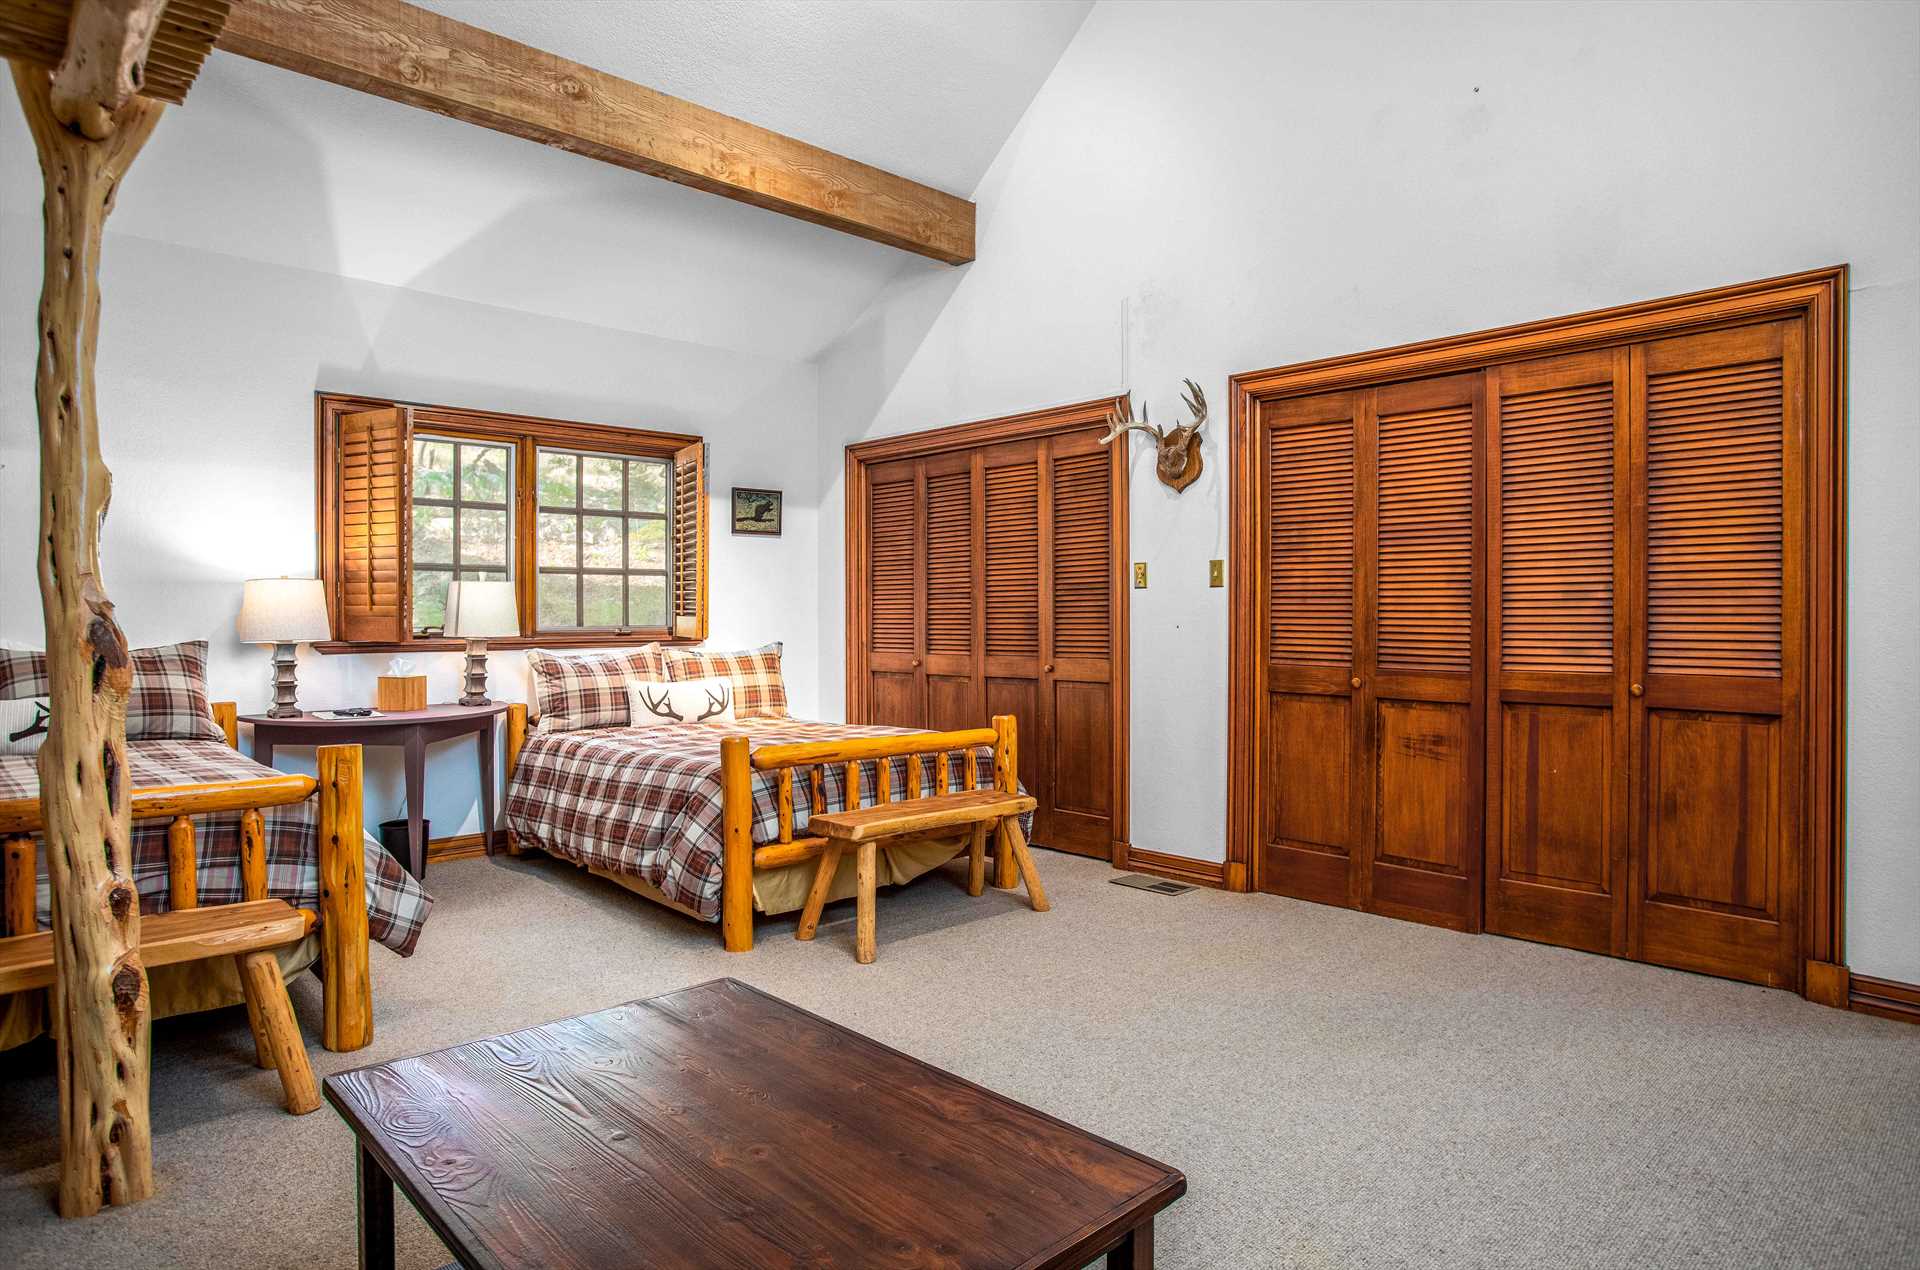                                                 From the bed frames to the doors, you can see the warm and rustic woodwork details are featured in every room of the Homestead.